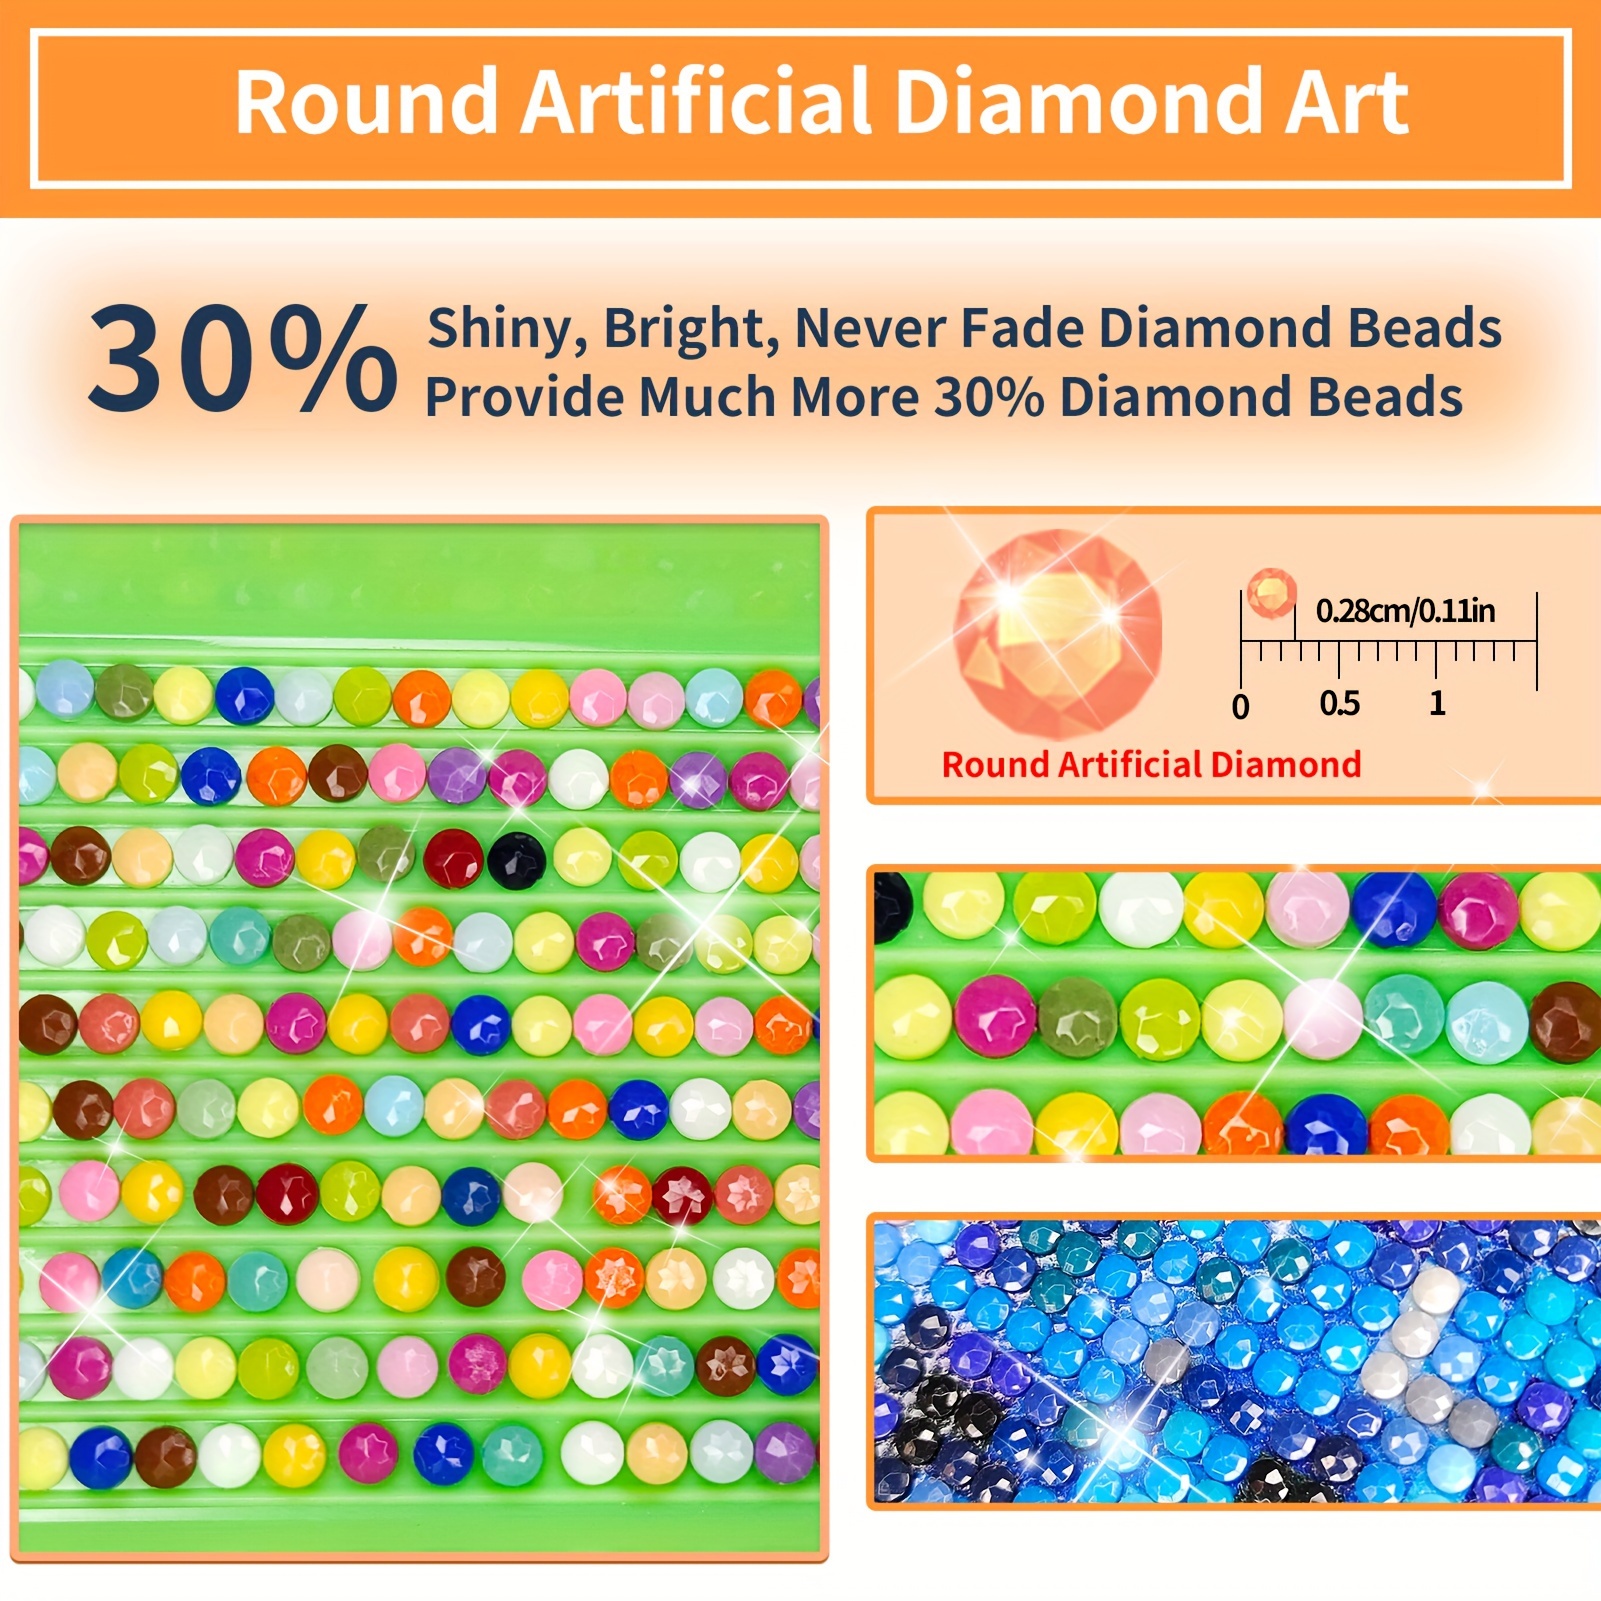 5D DIY Large Diamond Painting Kits For Adult,15.7x27.5inch/40x70cm Country  Cabin Round Full Diamond Diamond Art Kits Picture By Number Kits For Home W